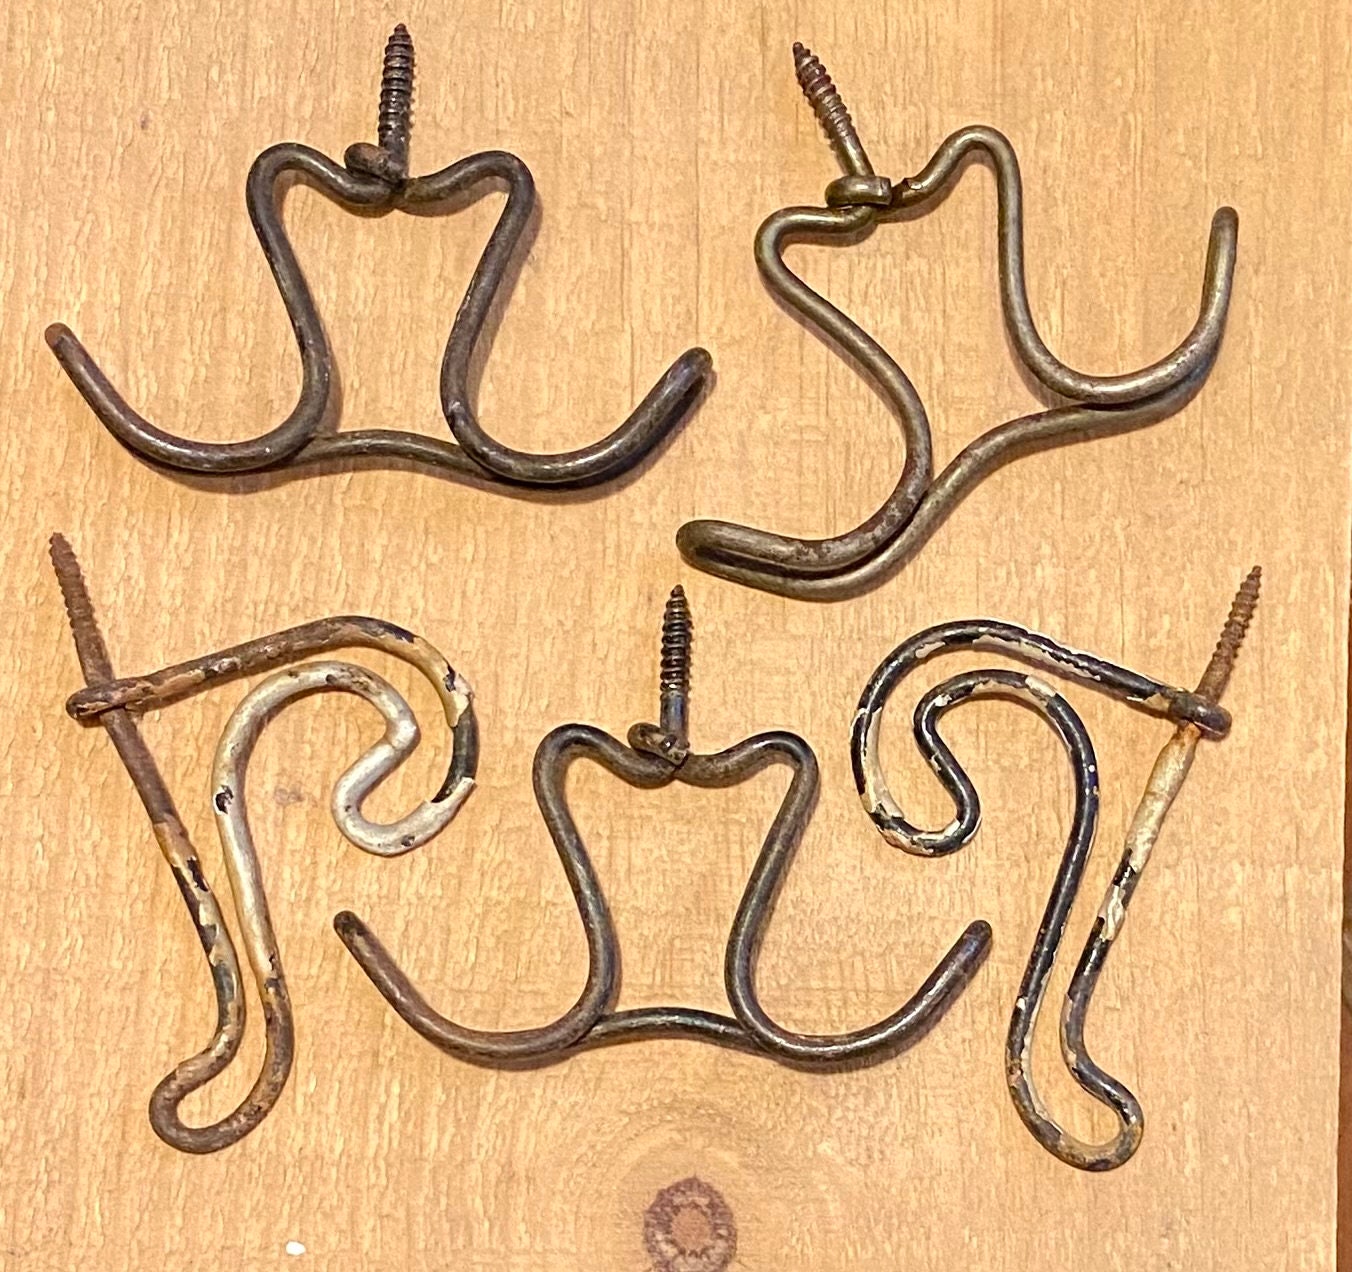 Lot of 5 Wire Coat Hooks. Old and Crusty and Good. Vintage Rustic